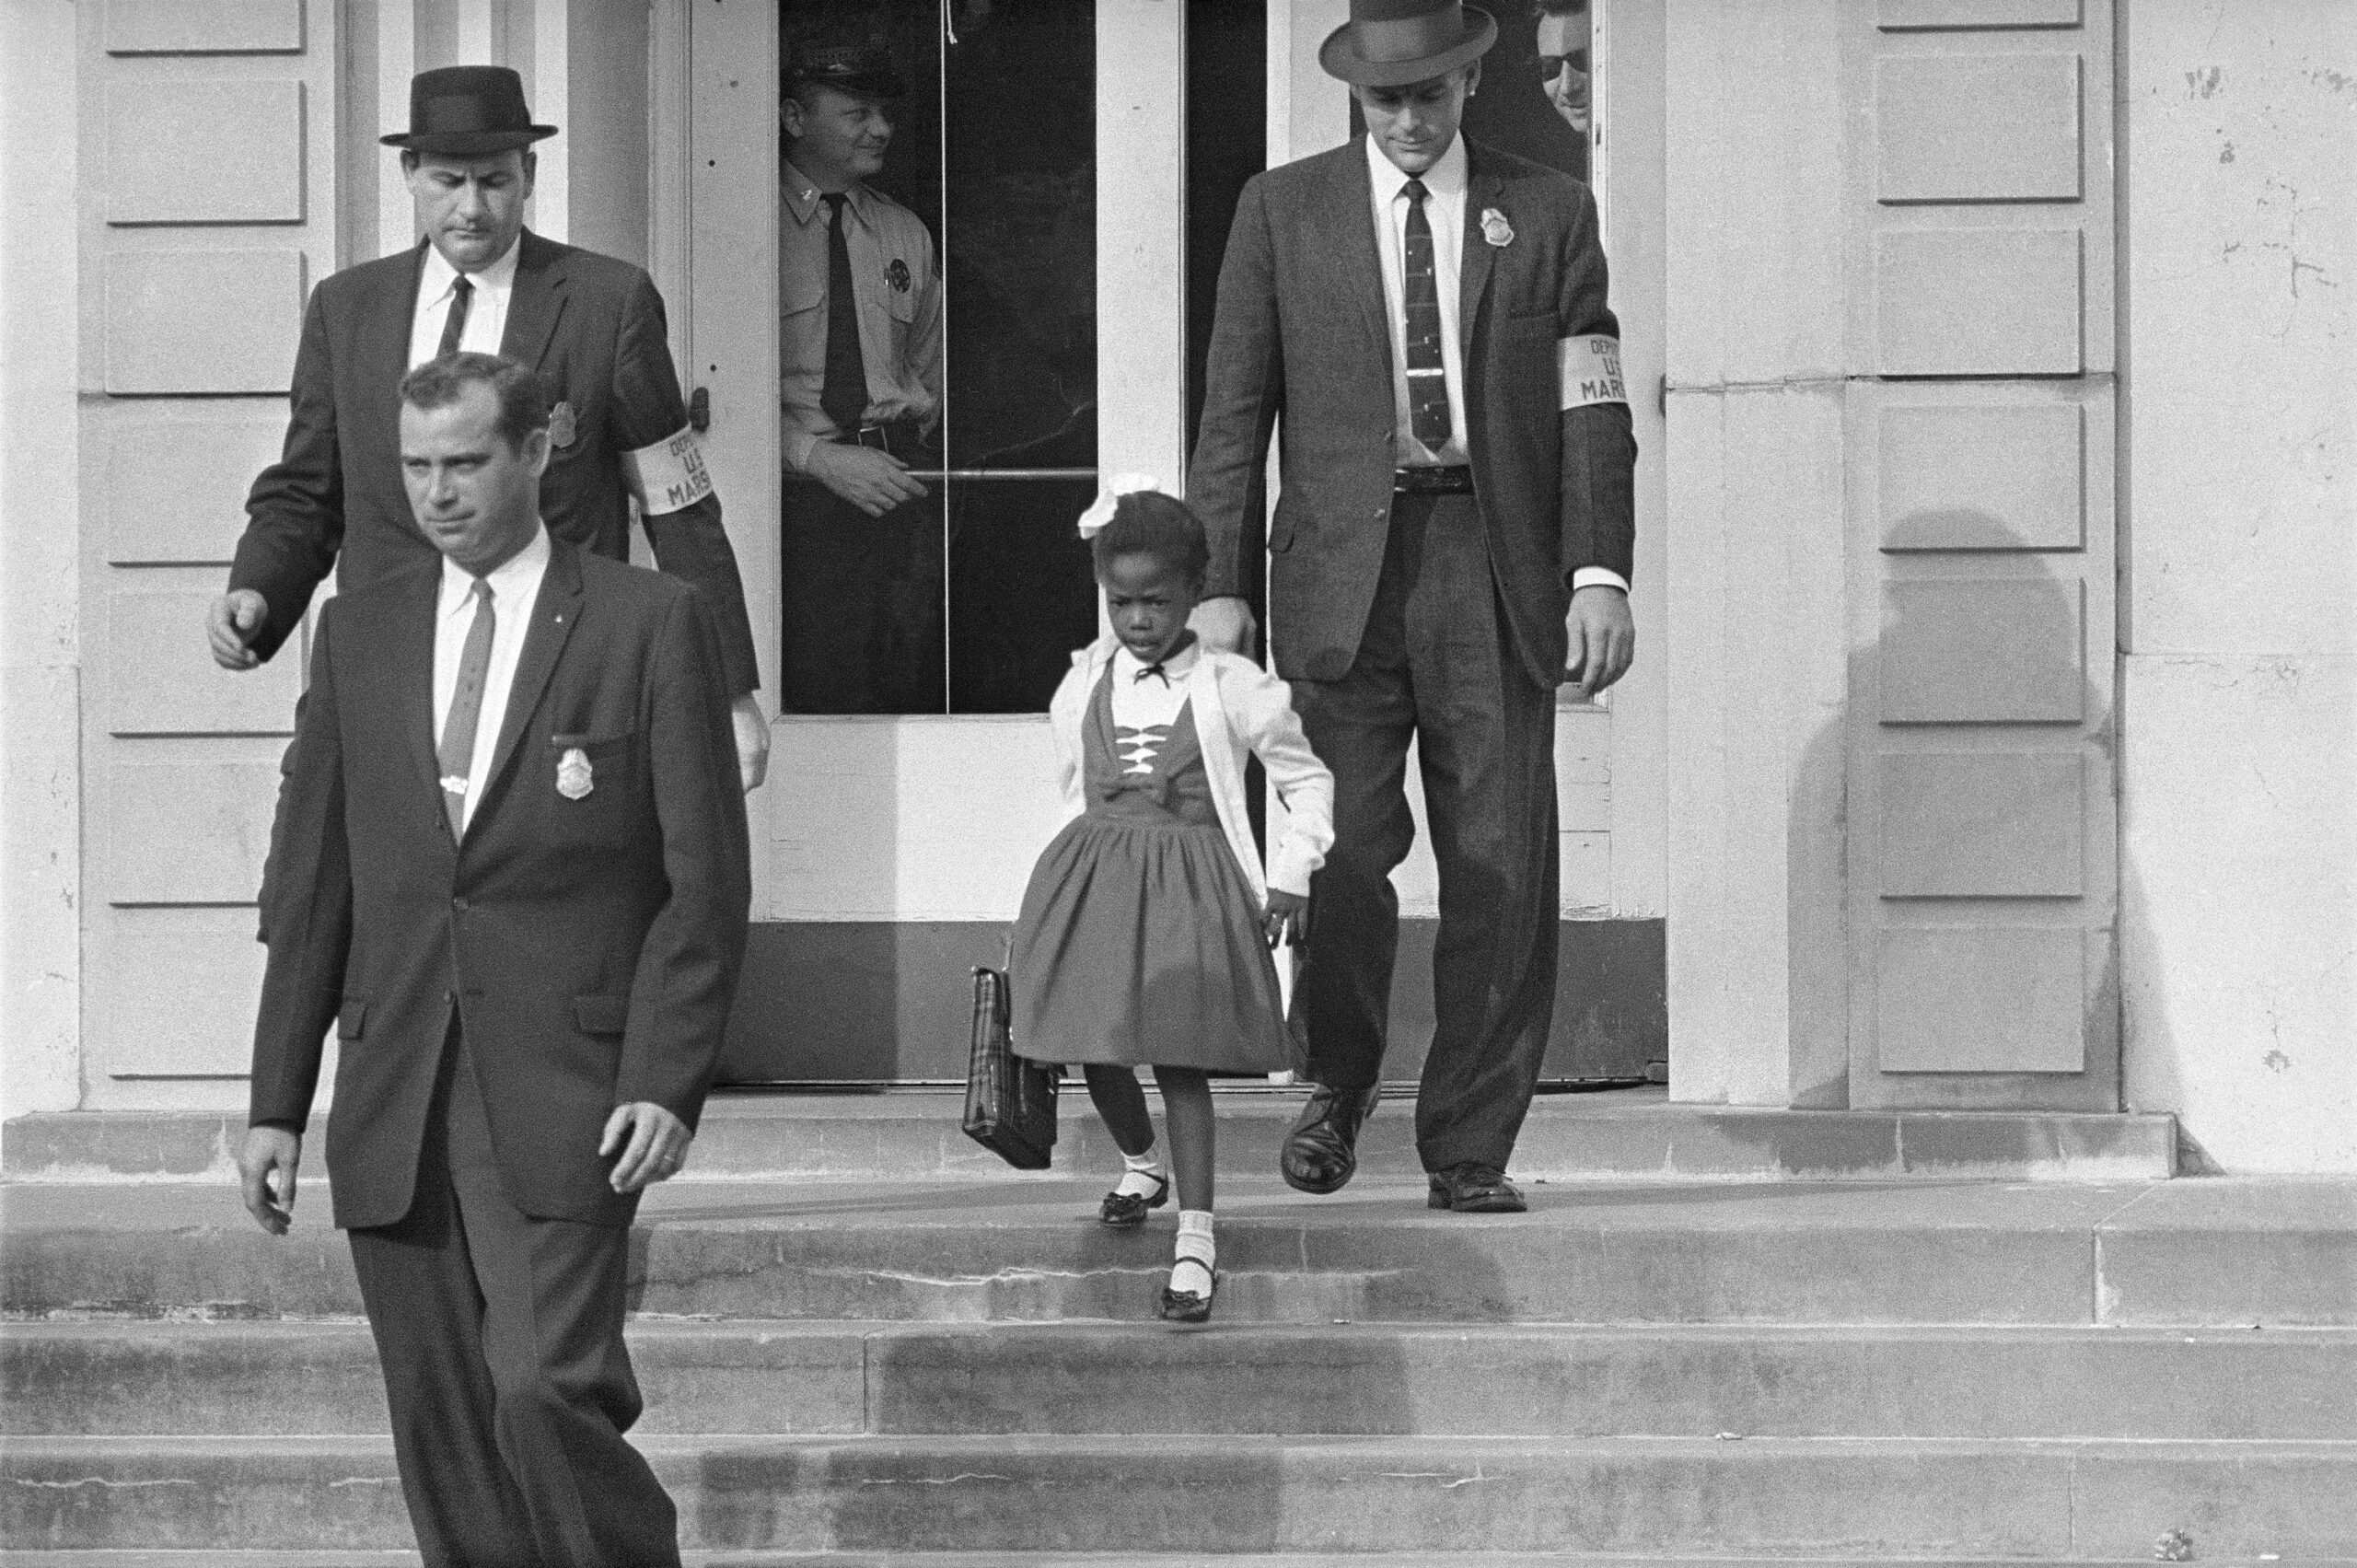 FILE - U.S. Deputy Marshals escort 6-year-old Ruby Bridges from William Frantz Elementary School in New Orleans, in this file photo from November 14, 1960. Bridges has authored a picture book to explain that long-ago experience to the youngest readers. (AP Photo/File) /